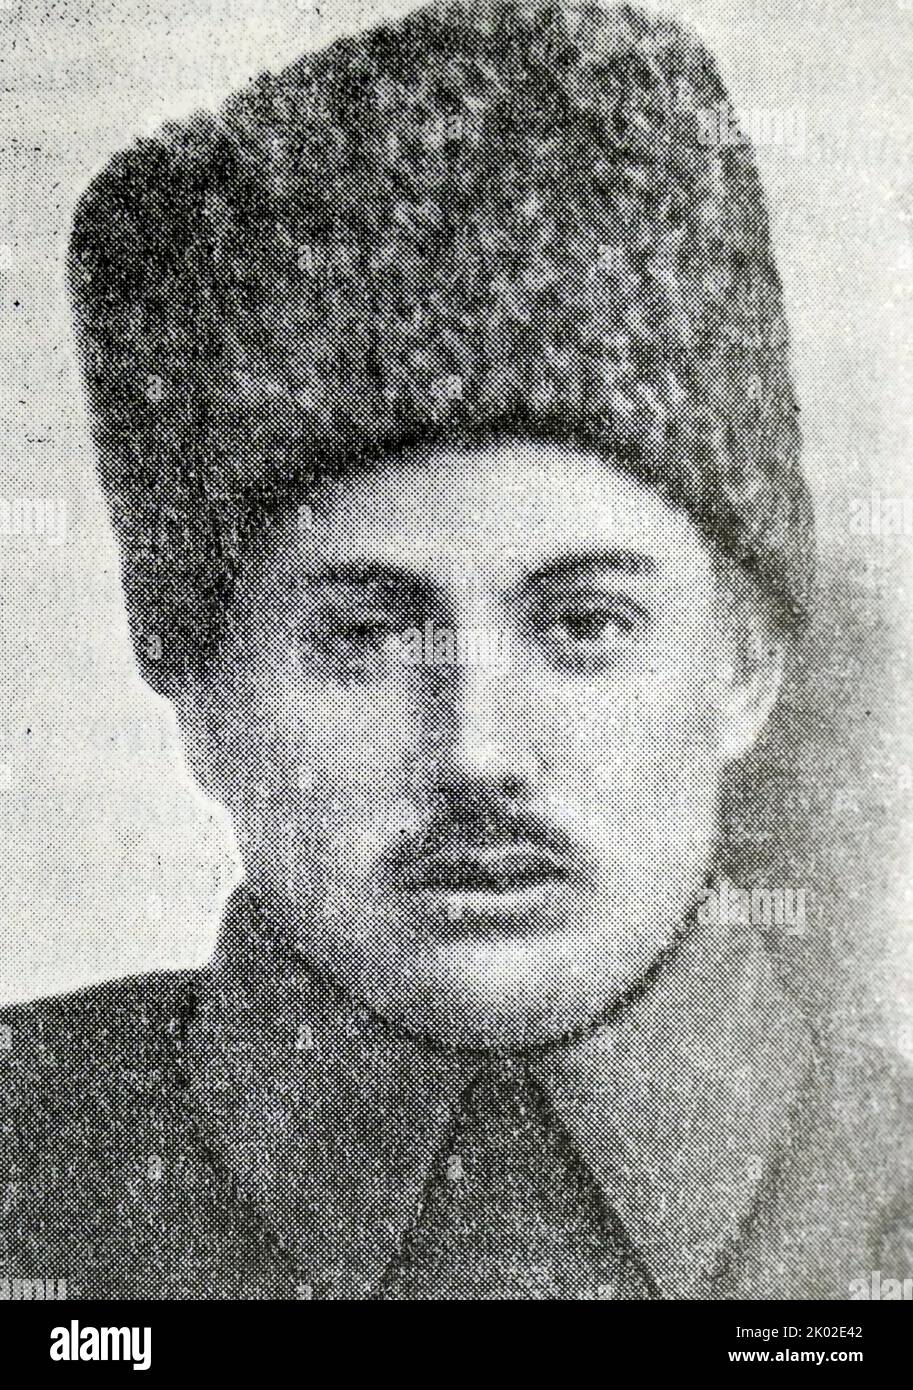 Efim Mefod'evich Mamontov (1888 - 1922). One of the leaders of the Russian Civil war, partisan movement in the Altai in 1918-19. In October 1919 he was elected commander of a partisan army of Western Siberia. This army took part in the destruction of the Kolchak forces, coordinating its actions with the Red Army. After the Civil War ended in the Altai, Mamontov was appointed assistant inspector of infantry for the Fifth Army. He was killed by kulaks. Stock Photo